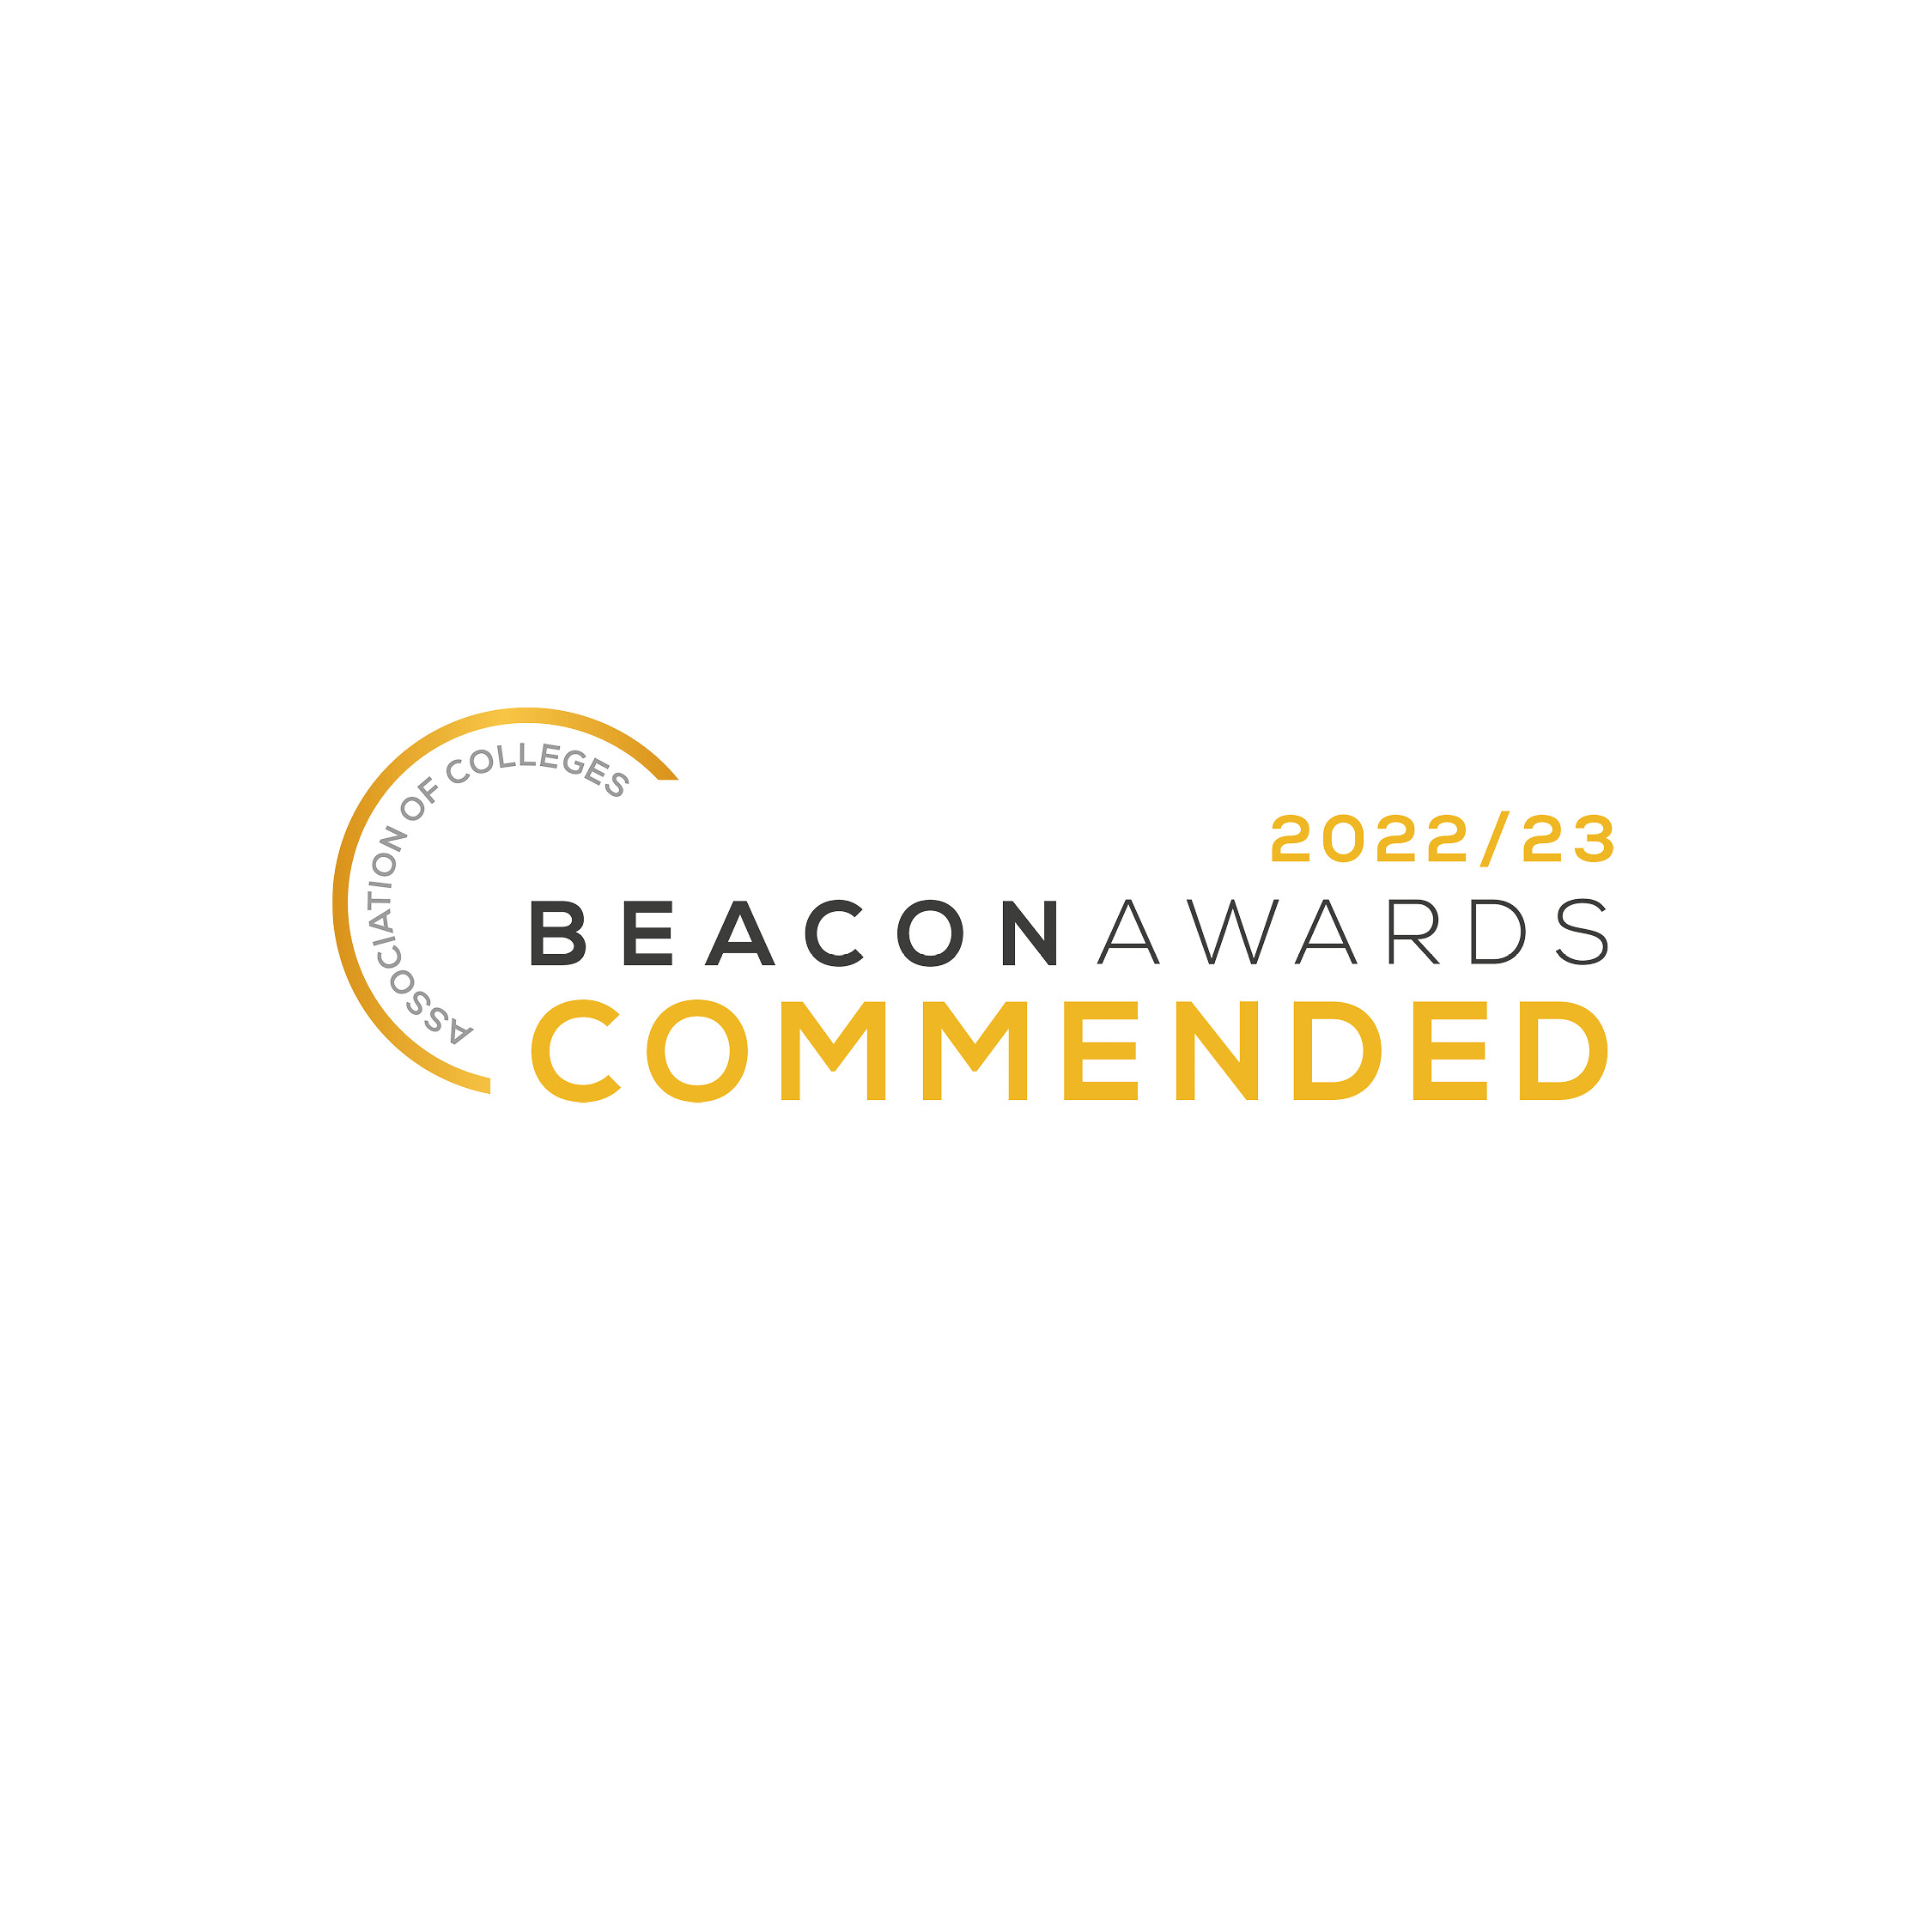 Beacon awards commended image and list of nominated colleges